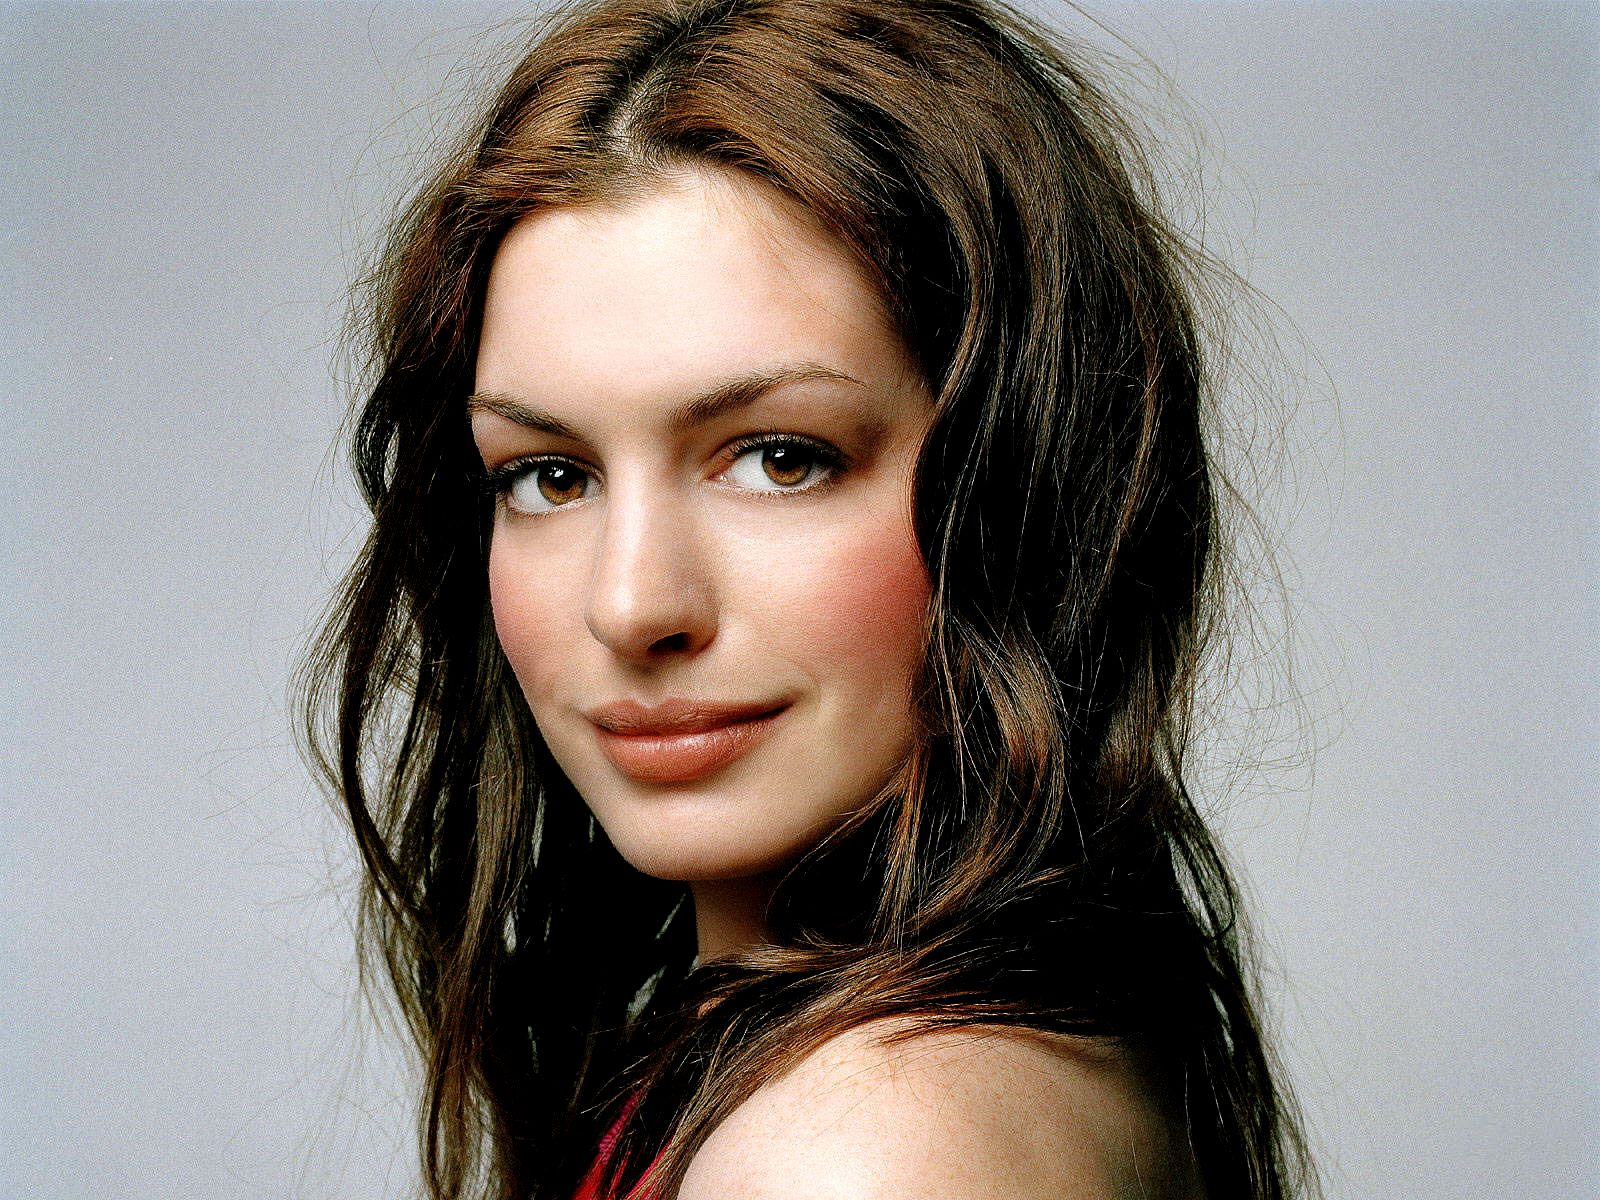 Iphone Celebrity Wallpapers: Anne Hathaway iPhone wallpapers